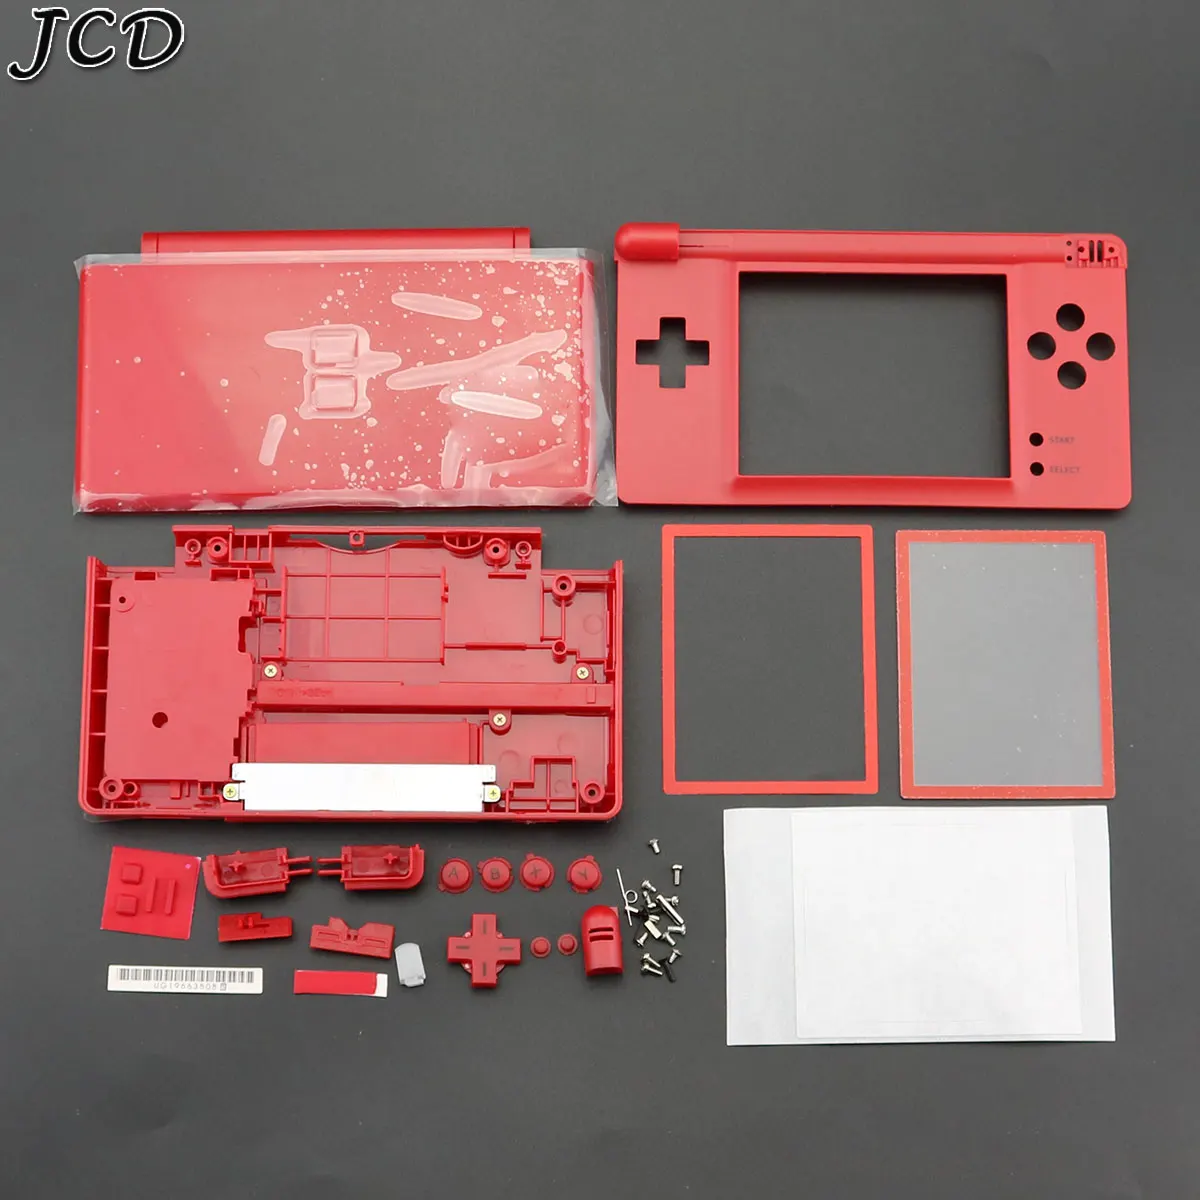 JCD Full Repair Part Replacement Housing Shell Case Cover Kit for DS Lite NDSL Cases Games & Accessories